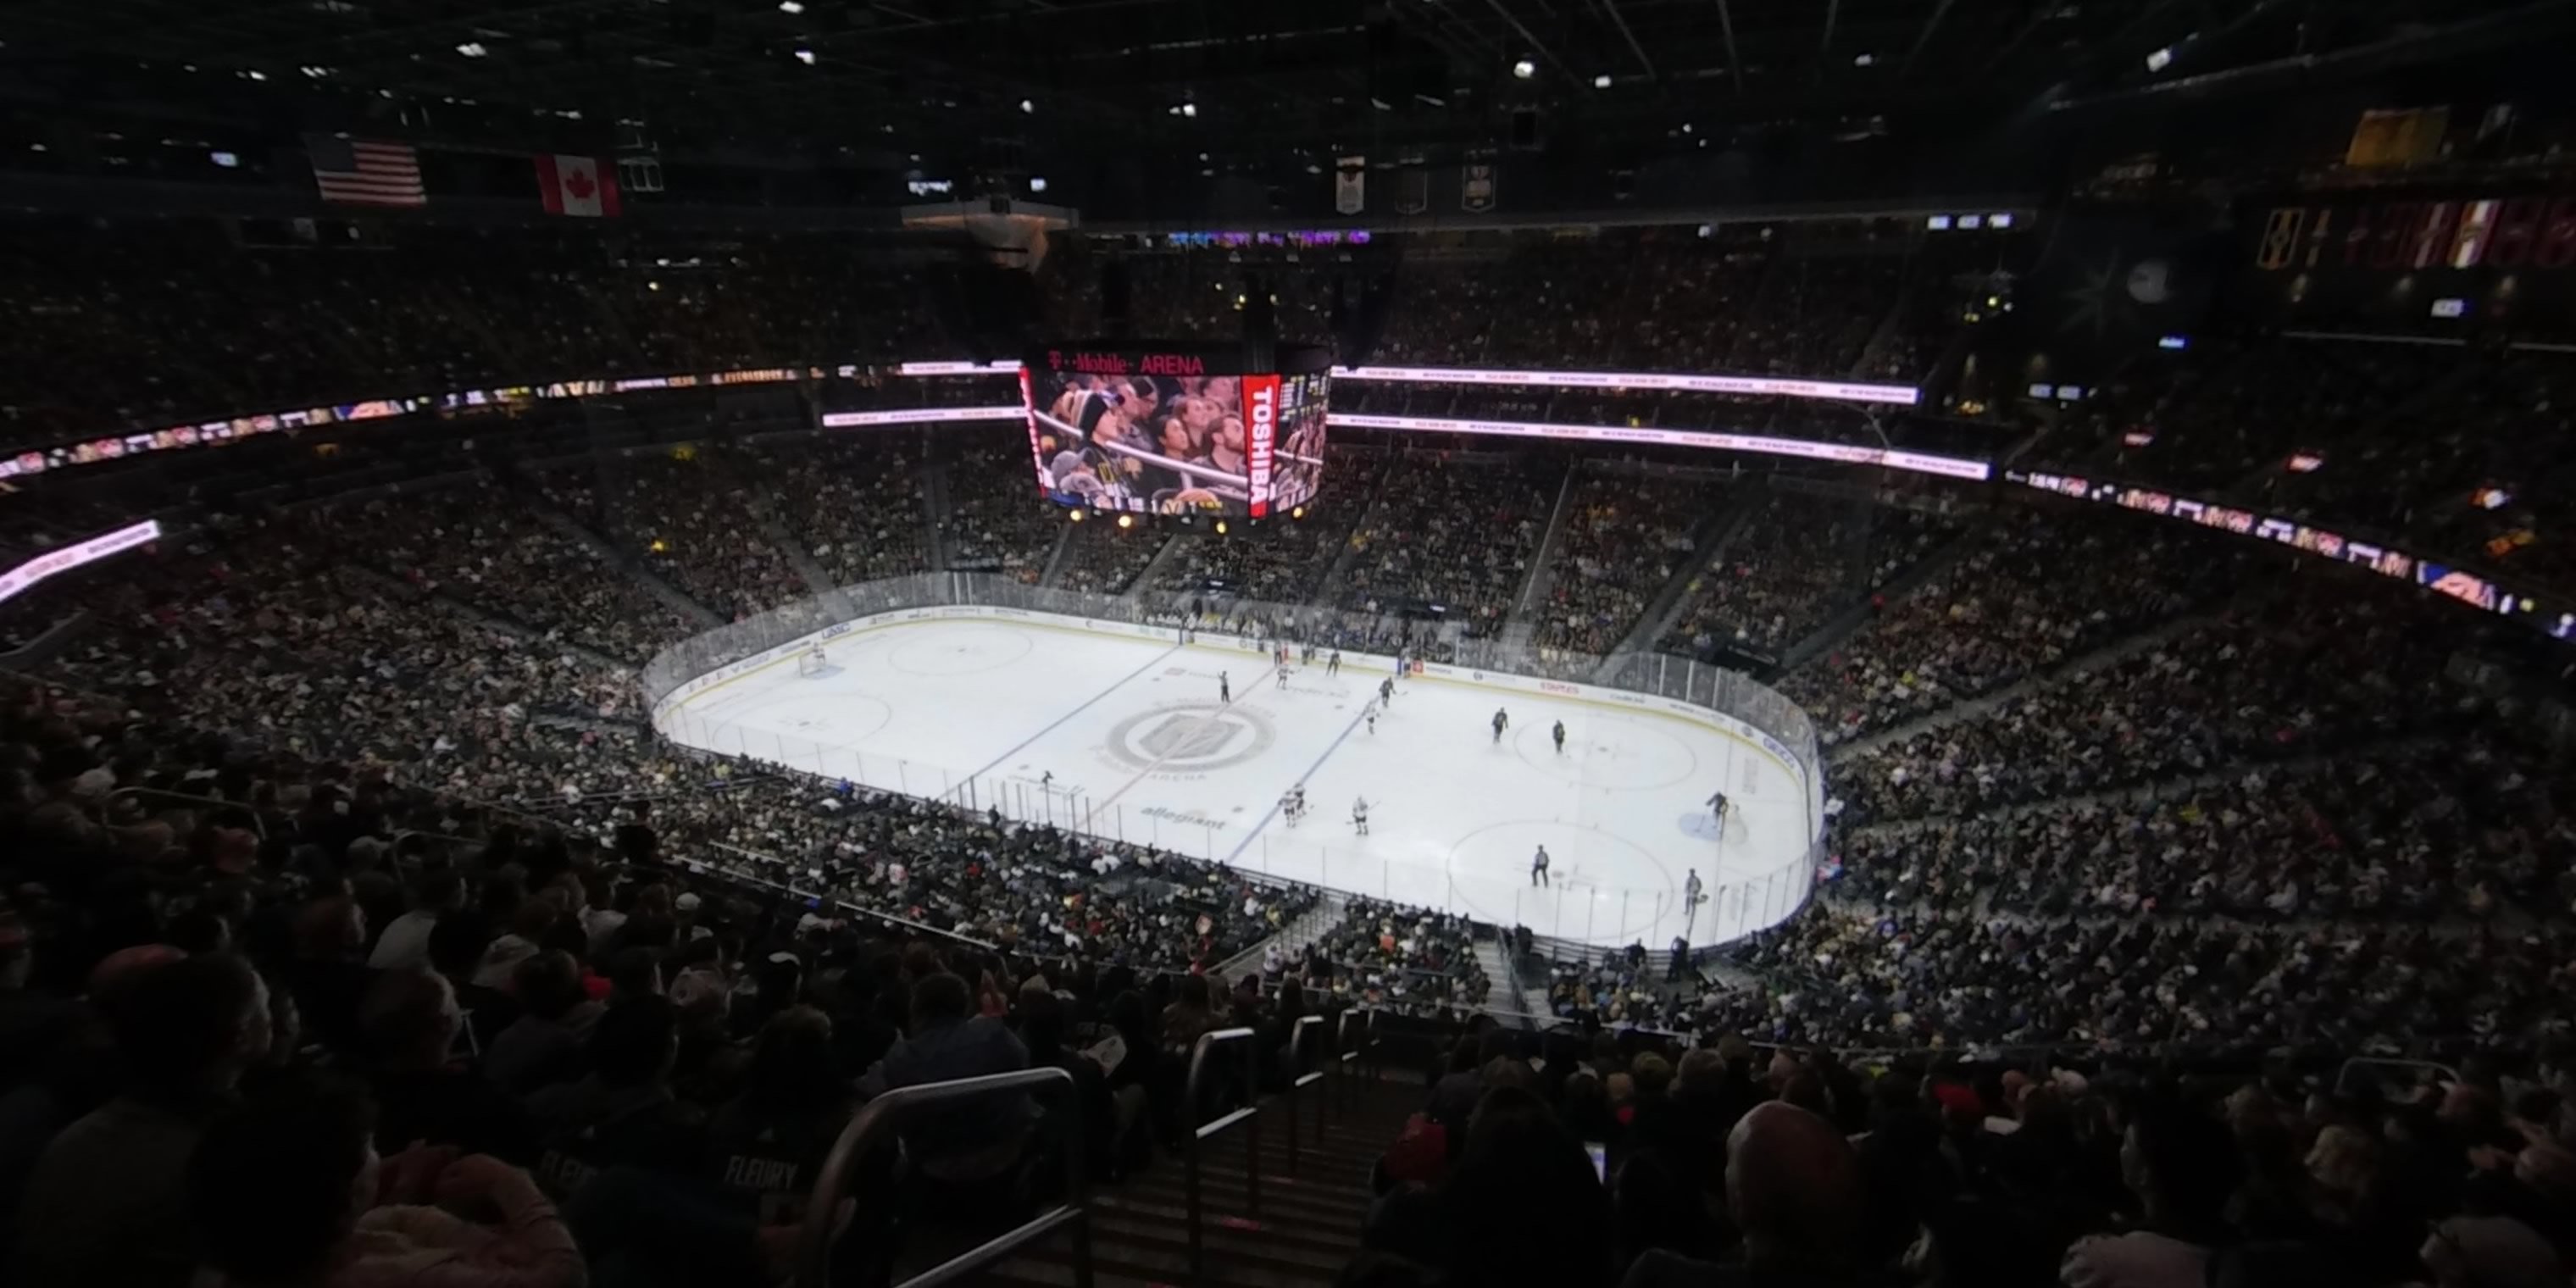 section 225 panoramic seat view  for hockey - t-mobile arena